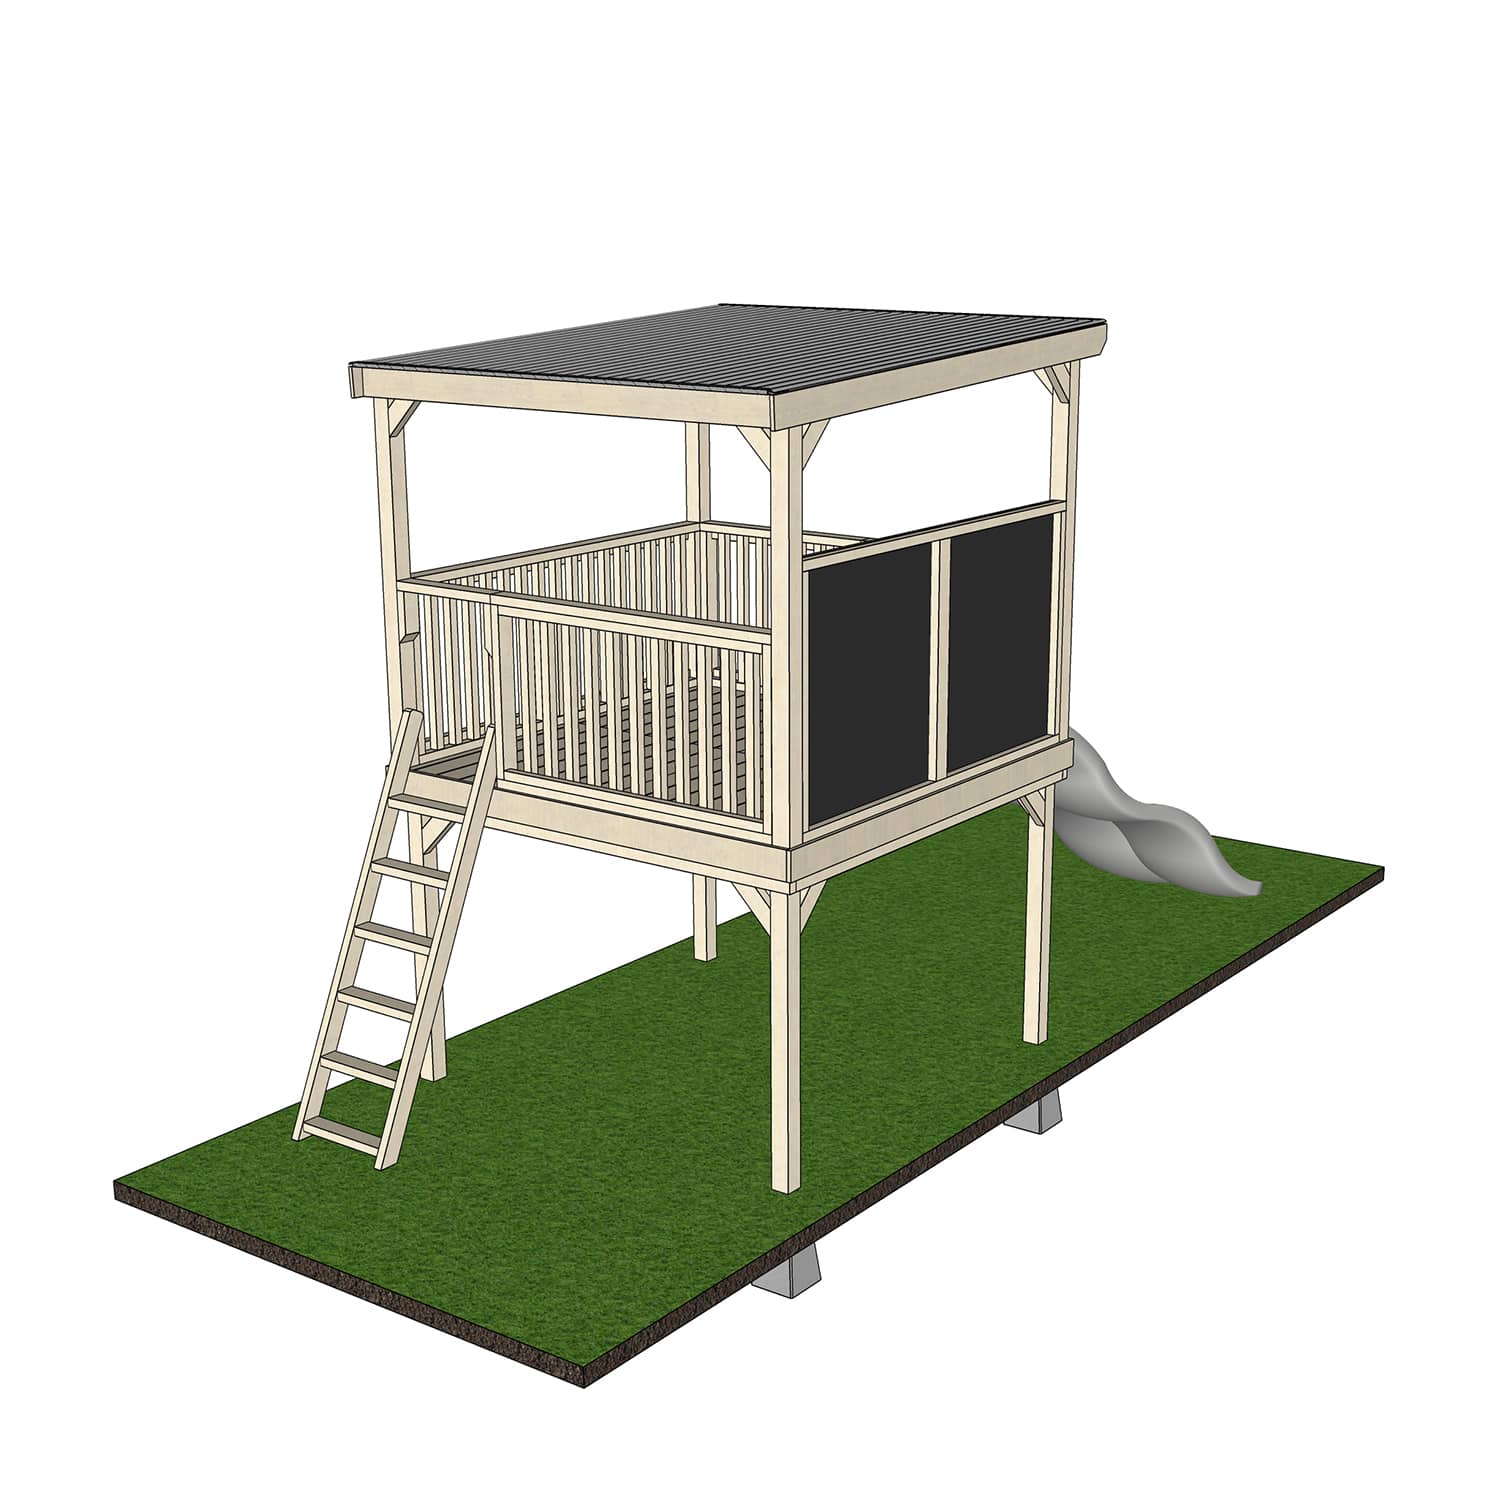 Castle and Cubby Raised Platform with Roof and Blackboard handrail double slide and ladder